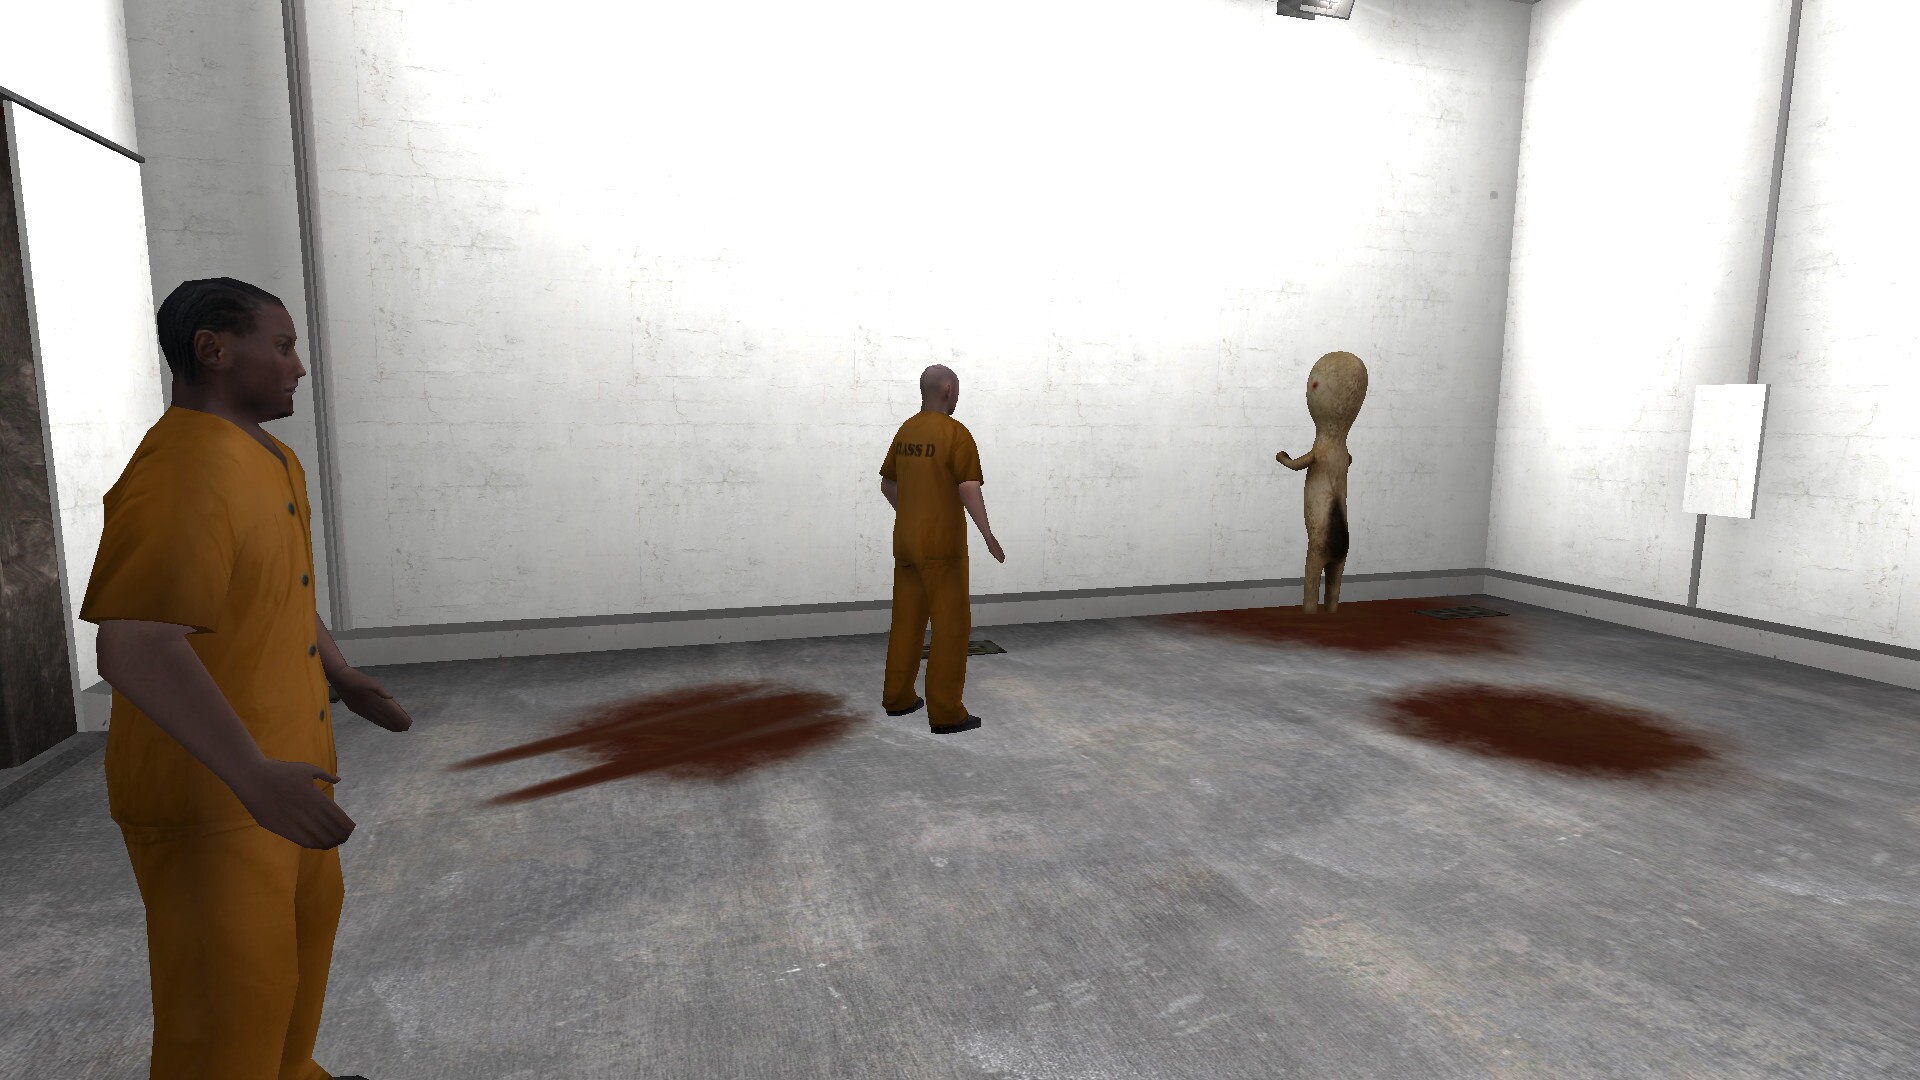 SCP 714 Demonstrations In SCP Containment Breach Ultimate